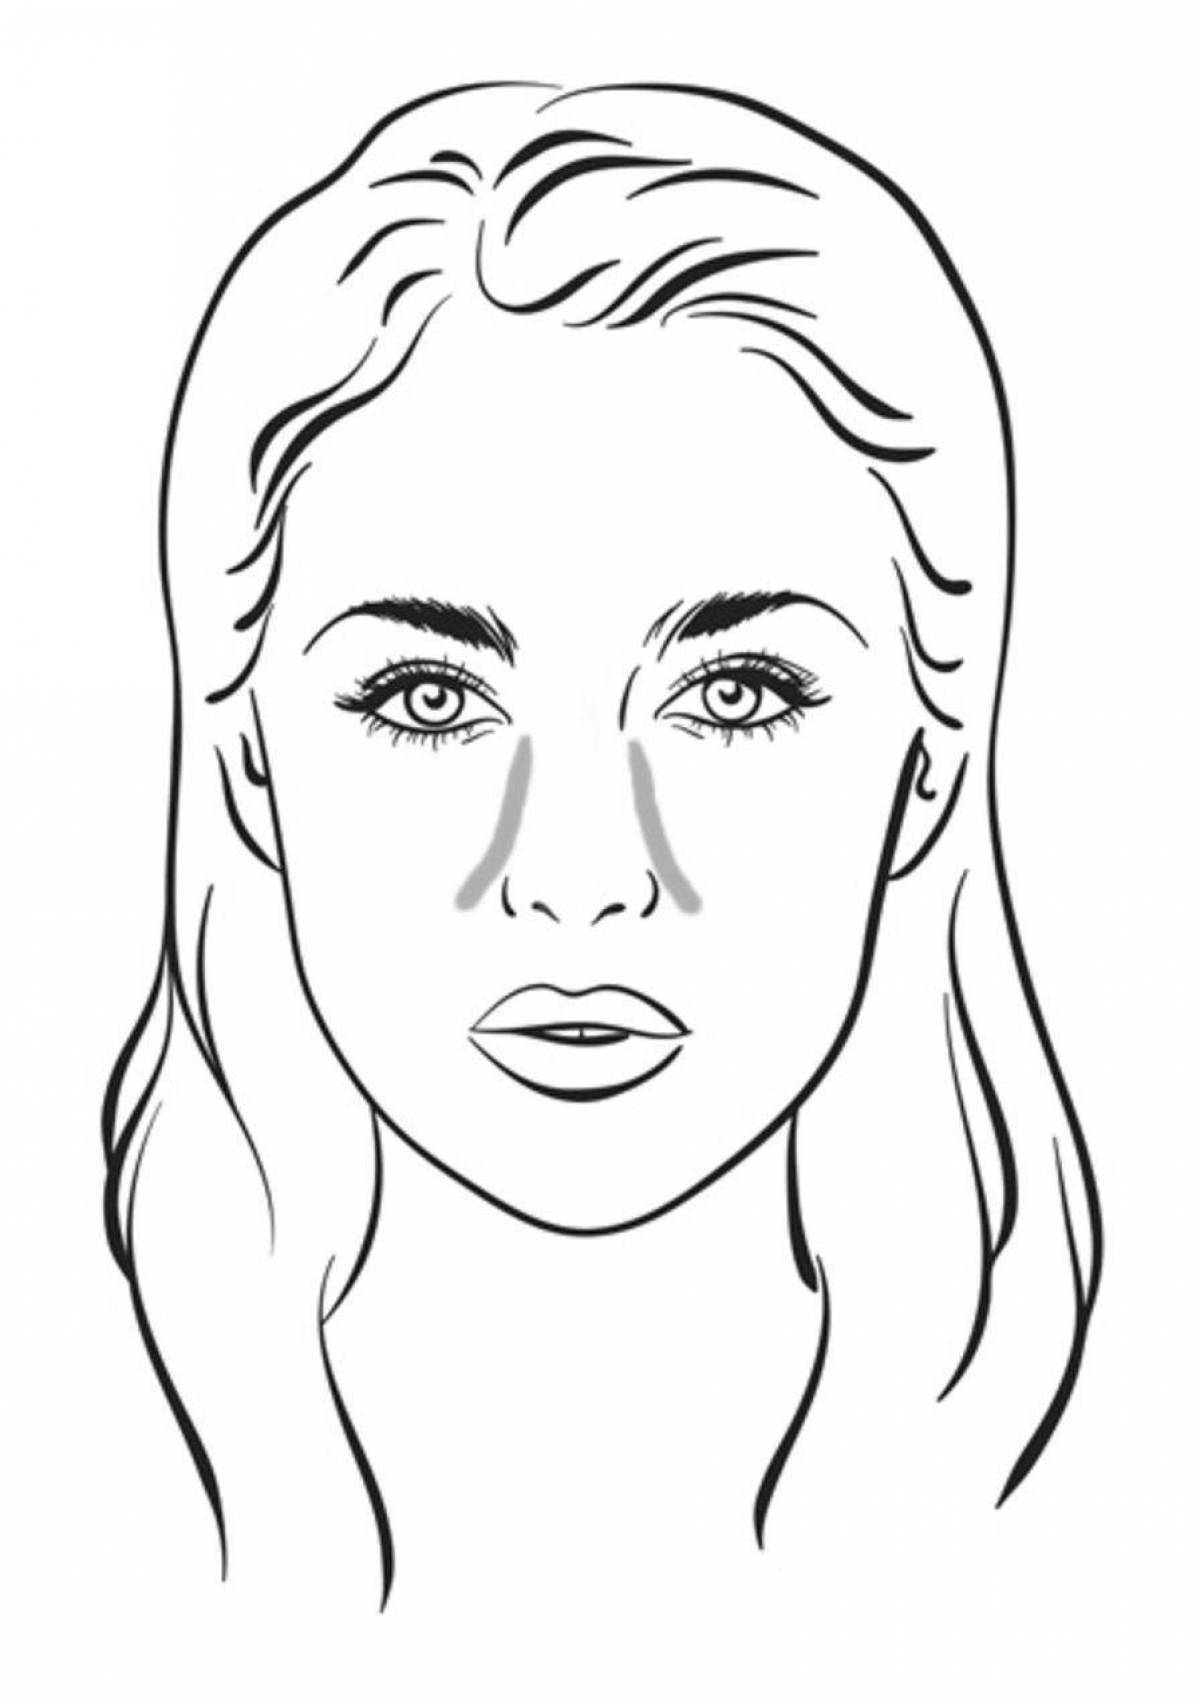 Exciting drawing of a girl's face